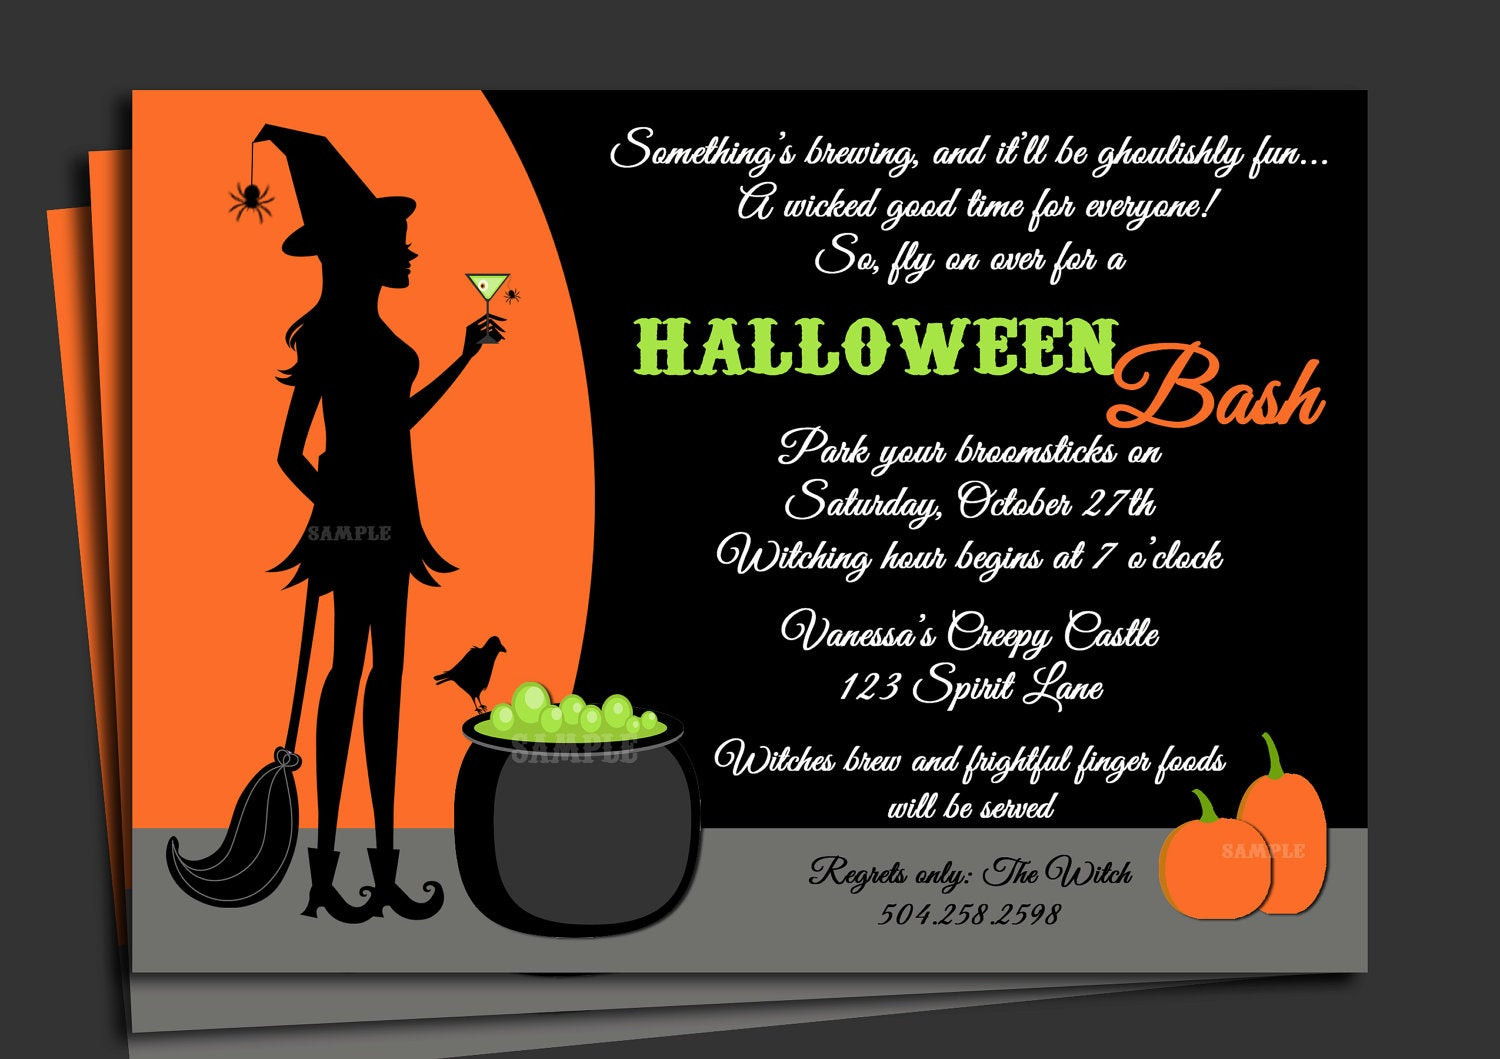 Invitation Ideas For Halloween Party
 Halloween Invitation Printable with FREE SHIPPING Cocktails